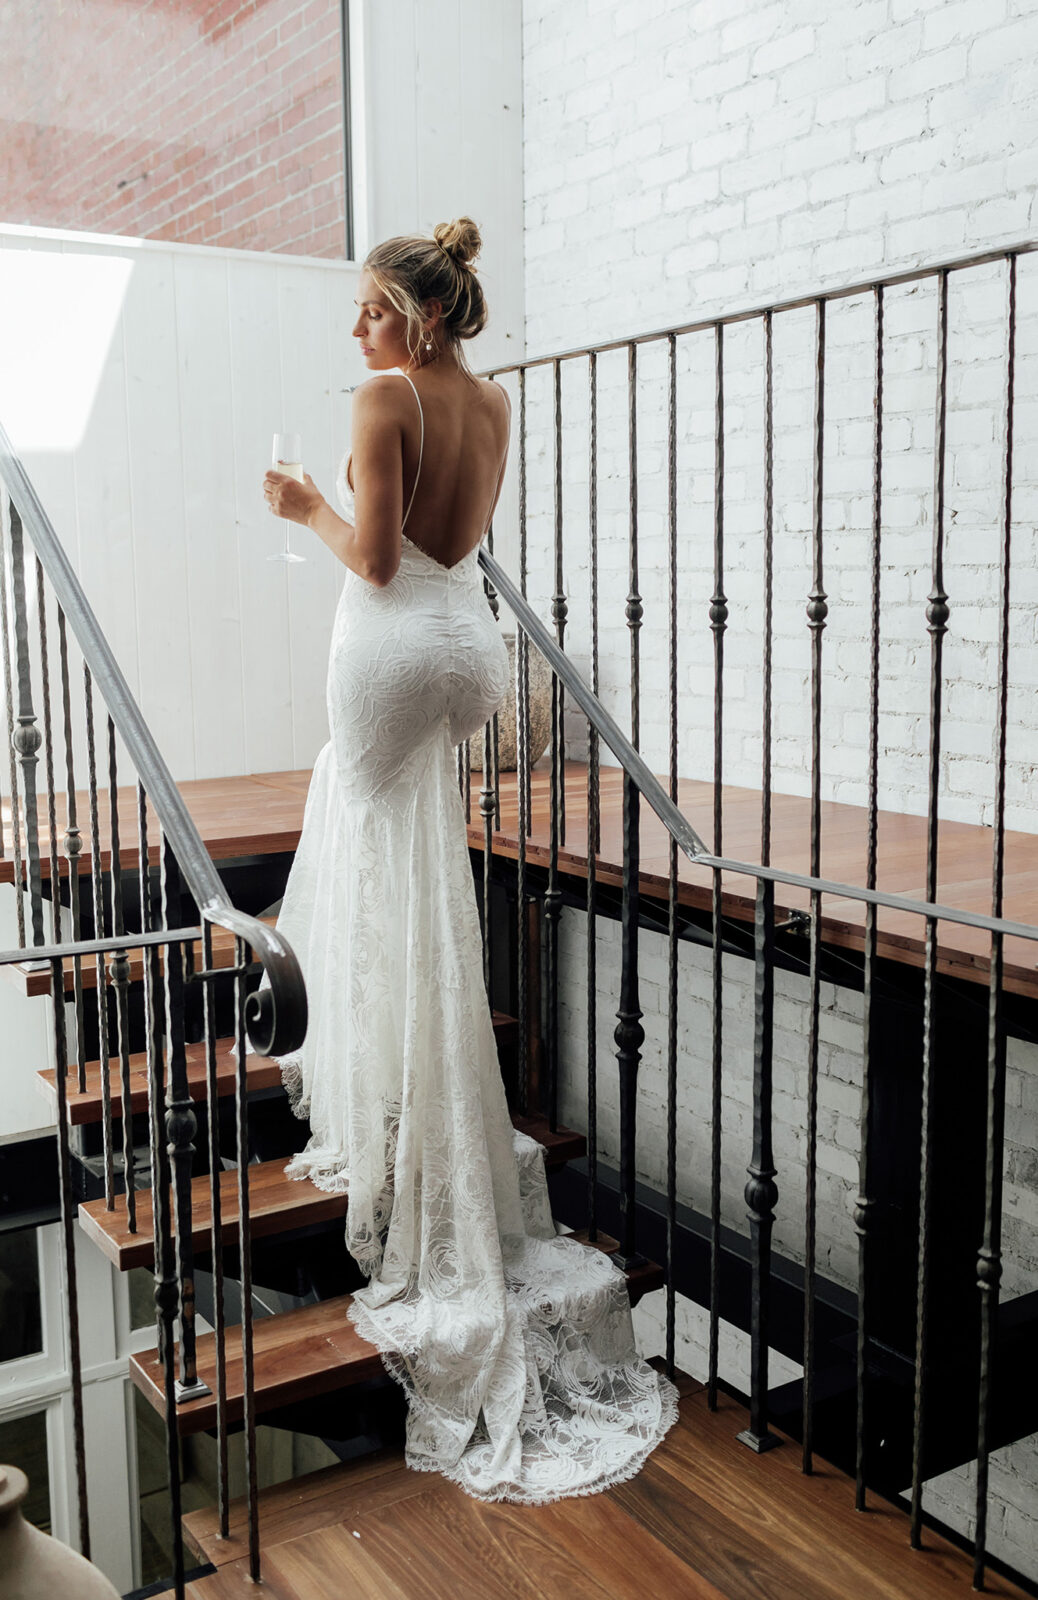 Brides wearing silhouette hugging ivory lace gown, with rose stretch lace, eyelash detailing, and stunning low back, Clo gown designed by Grace Loves Lace.